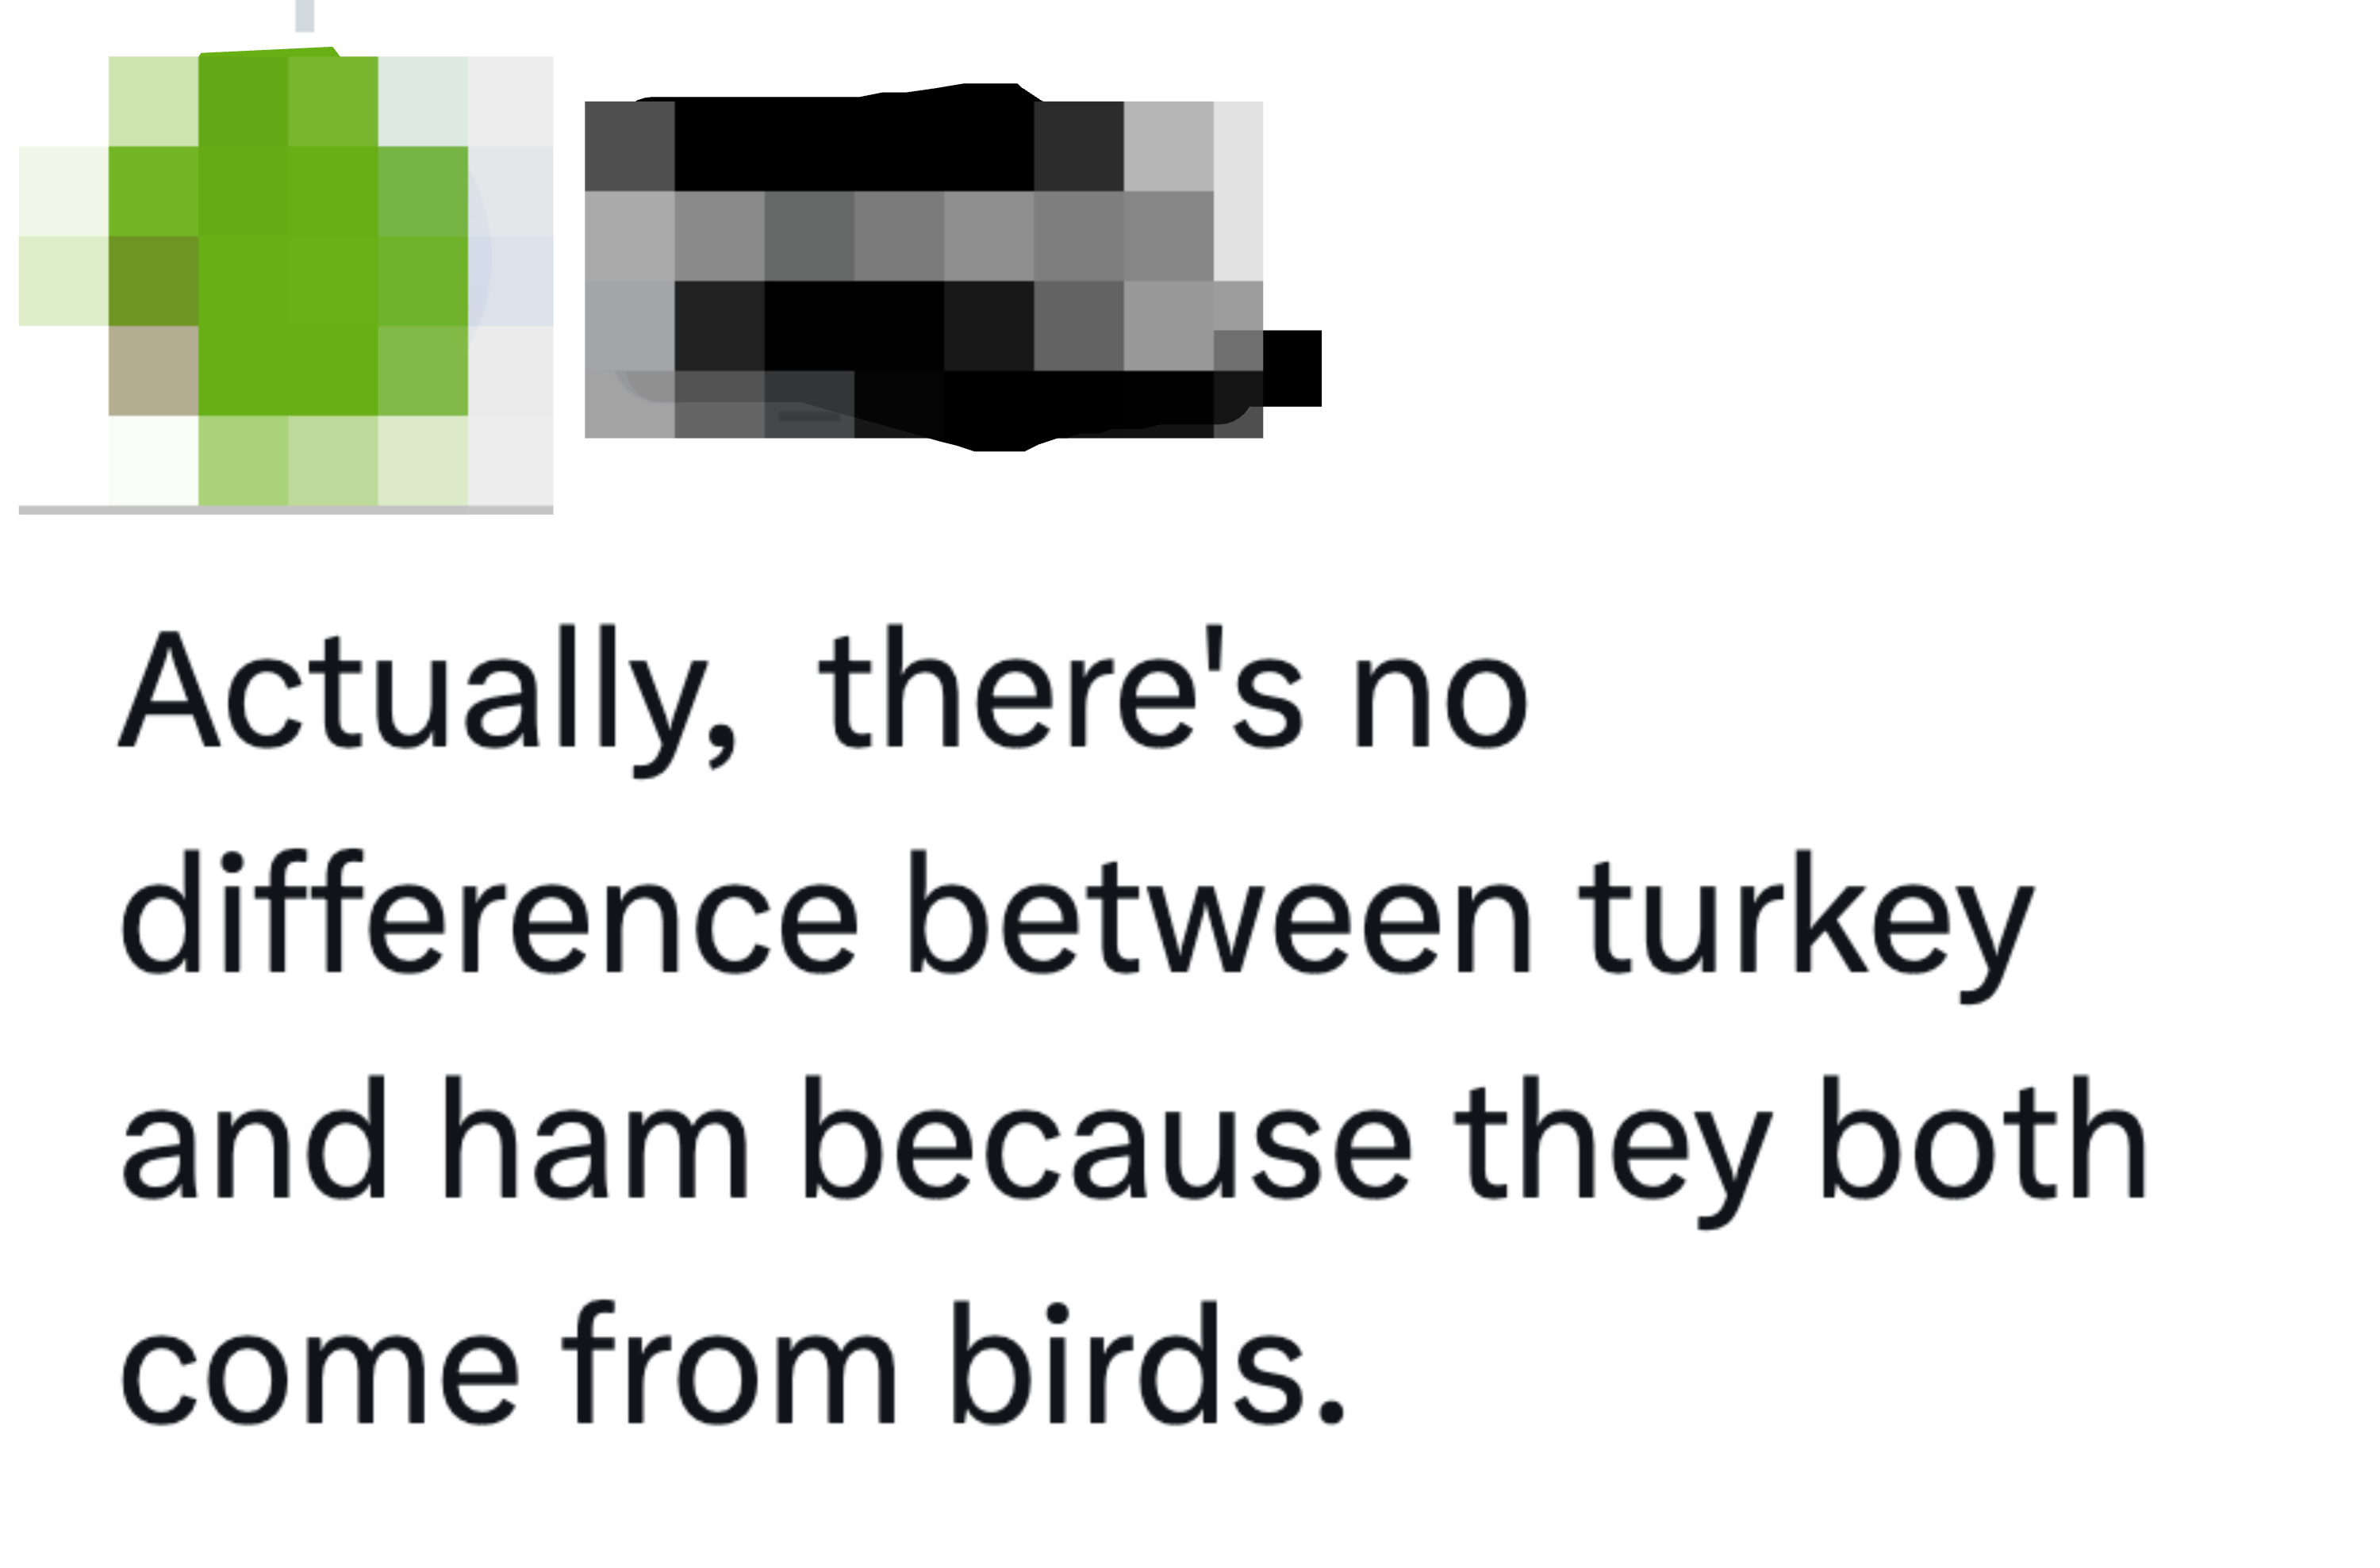 &quot;Actually, there&#x27;s no difference between turkey and ham because they both come from birds&quot;